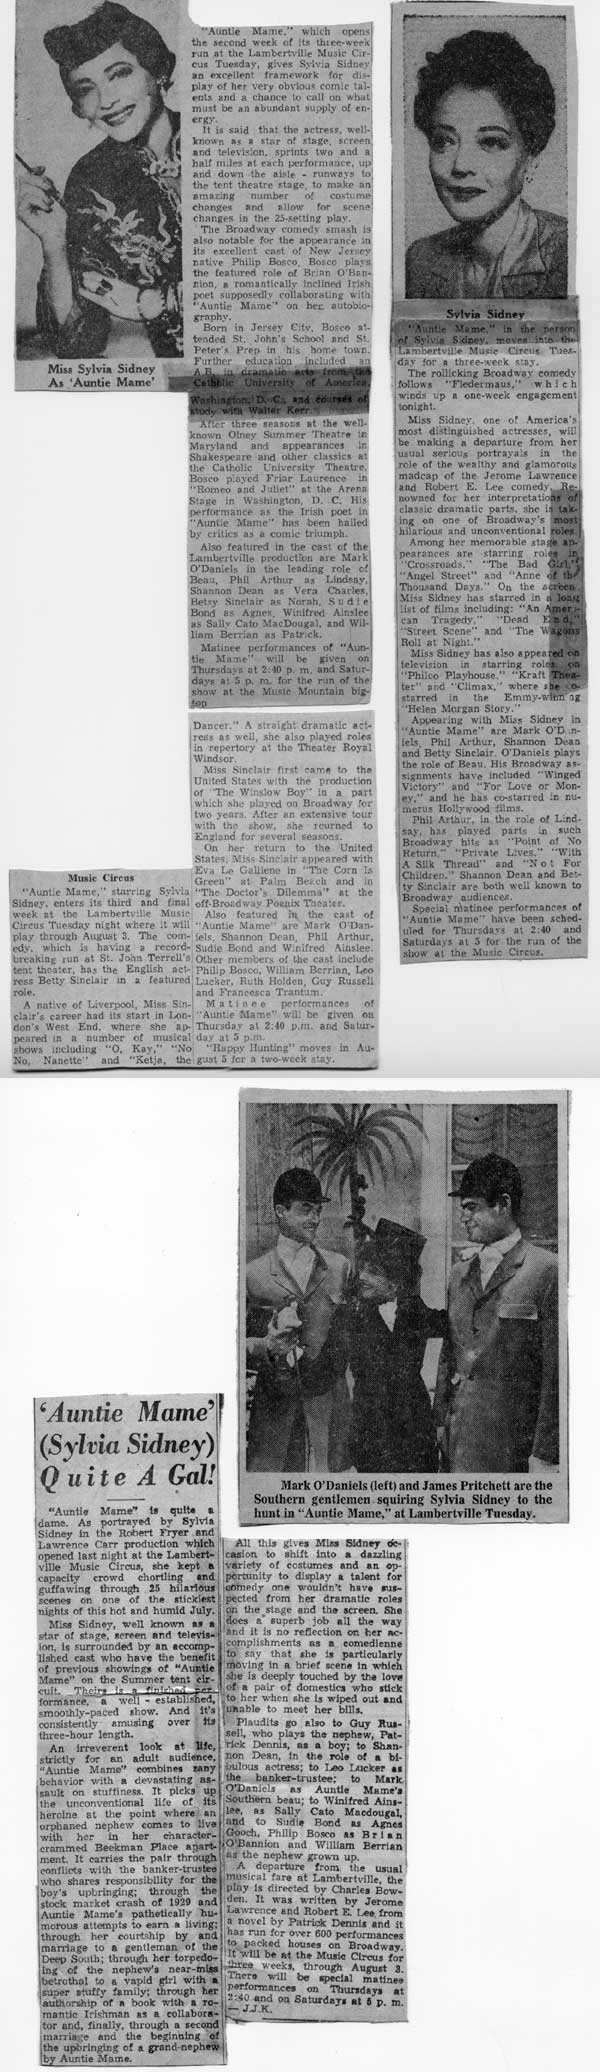 'Auntie Mame' press clippings